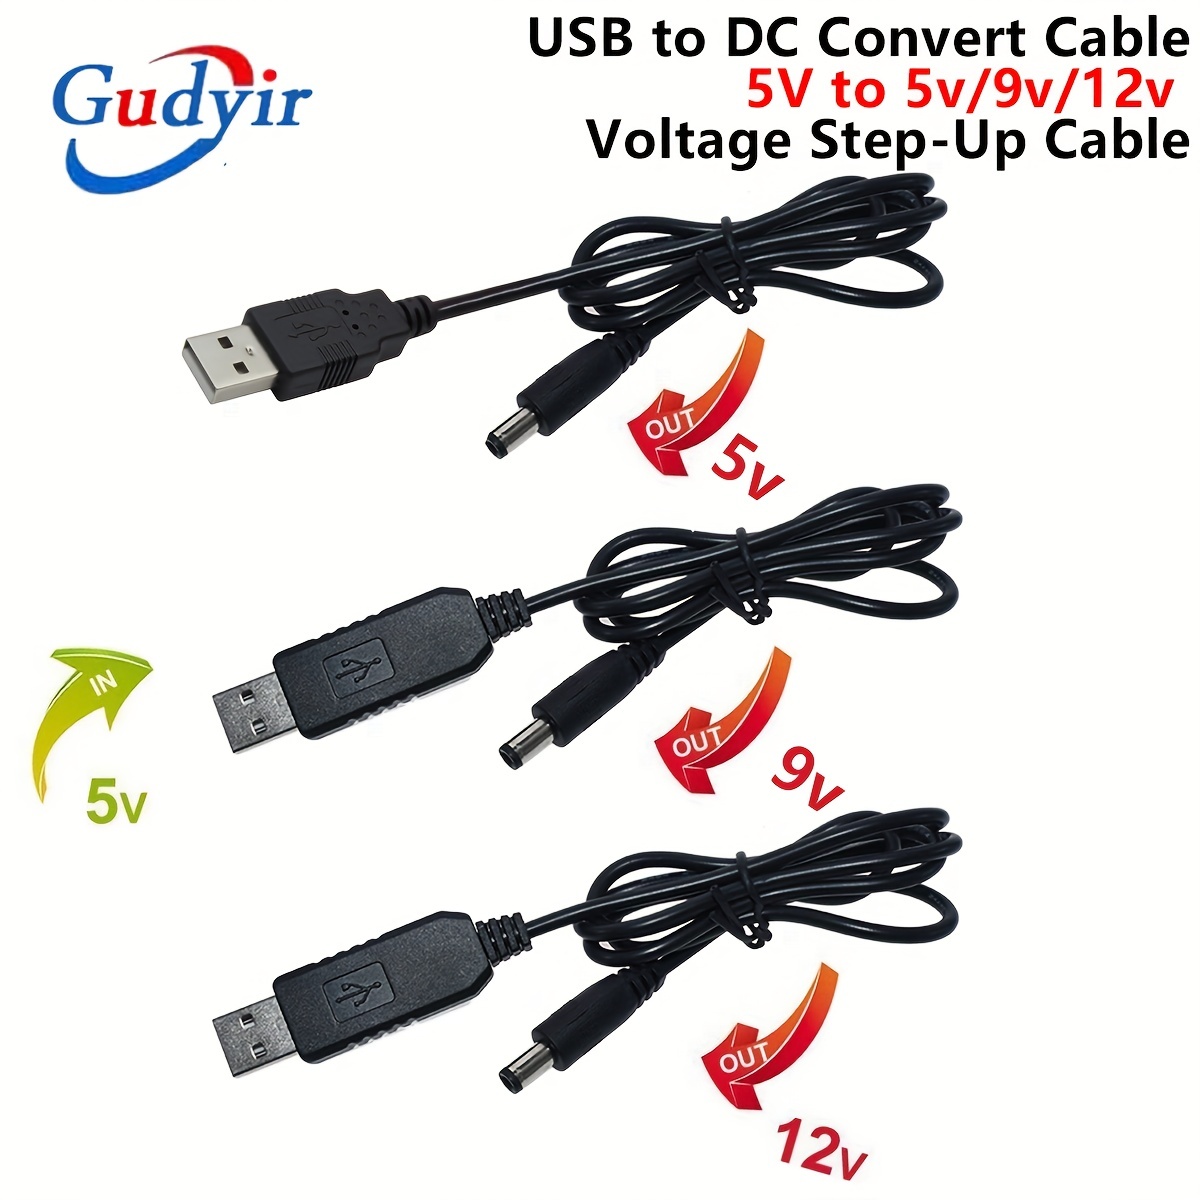 USB Power Boost- Line Step Up Module Cable USB 5V to DC 9v 12v 5.5x2.1mm  Connector Converter DC3.5x1.35mm Adapter Plug- 